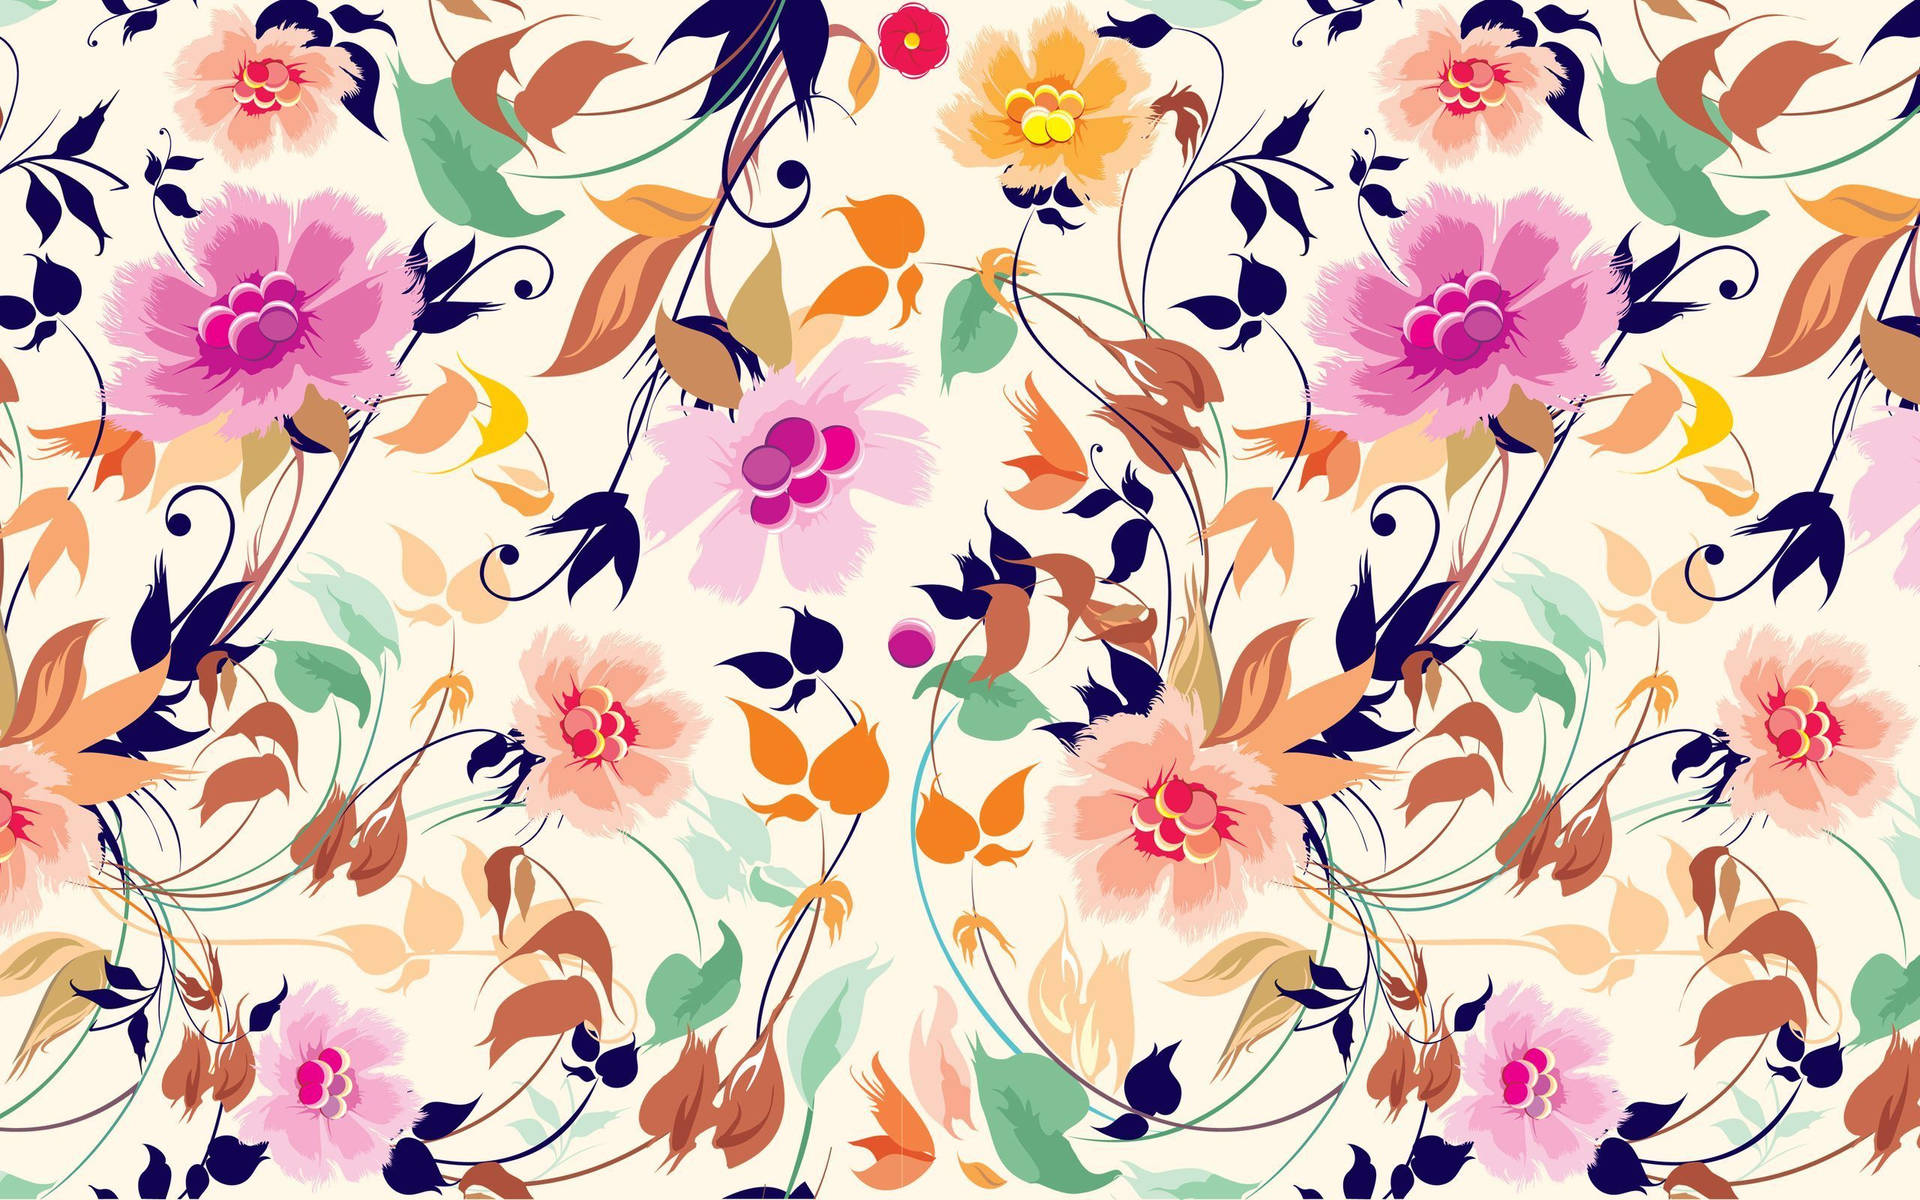 Aesthetic Fall Floral Art Background